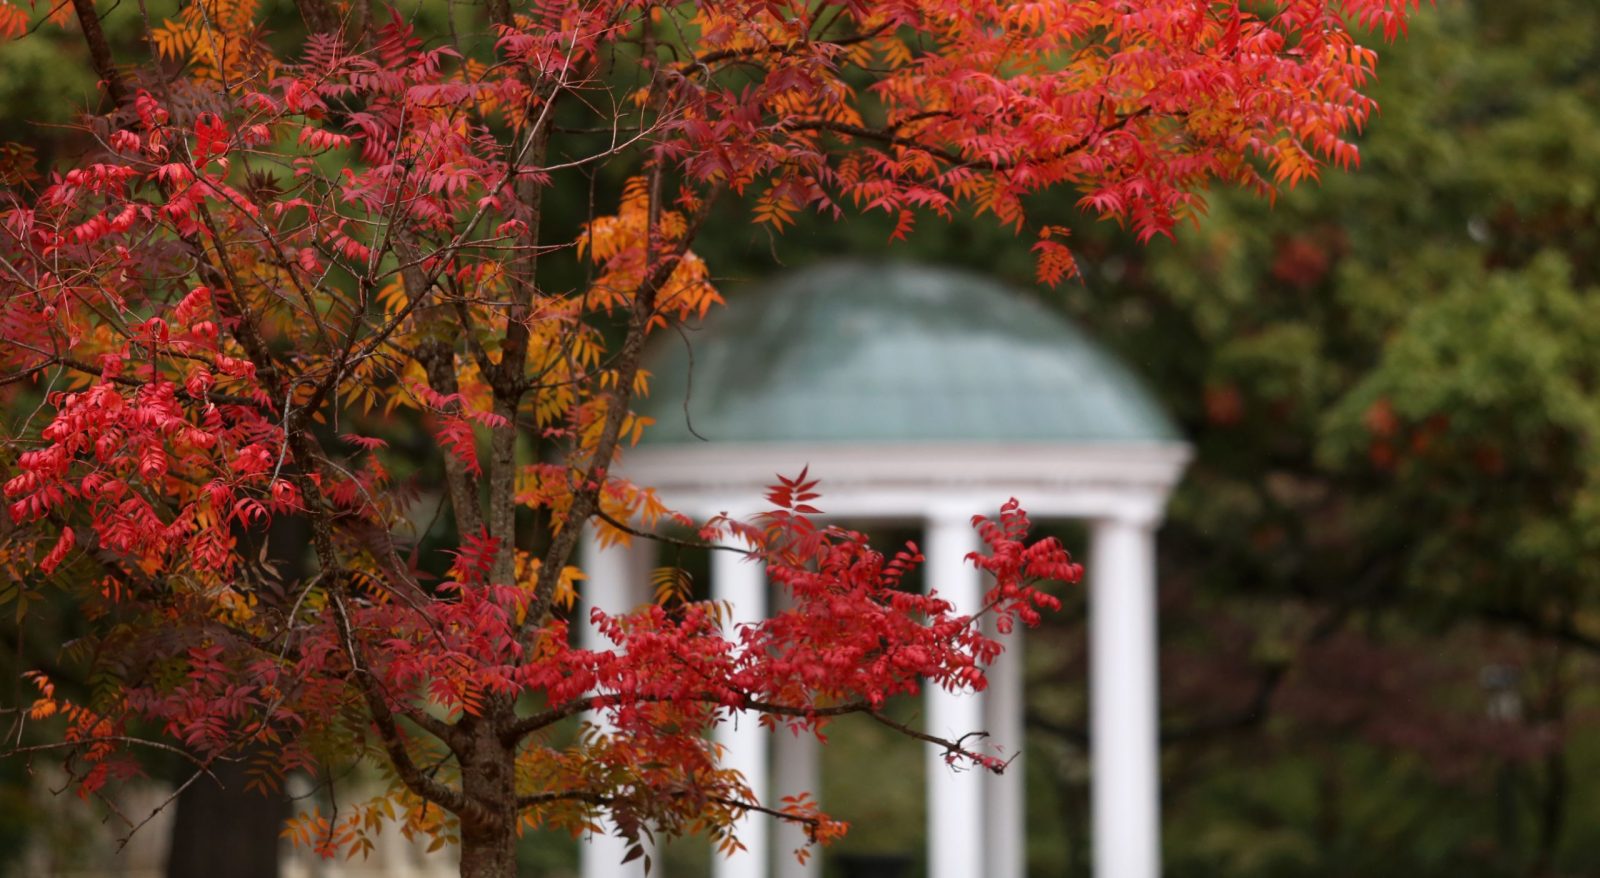 The Old Well in the fall. (UNC photo)